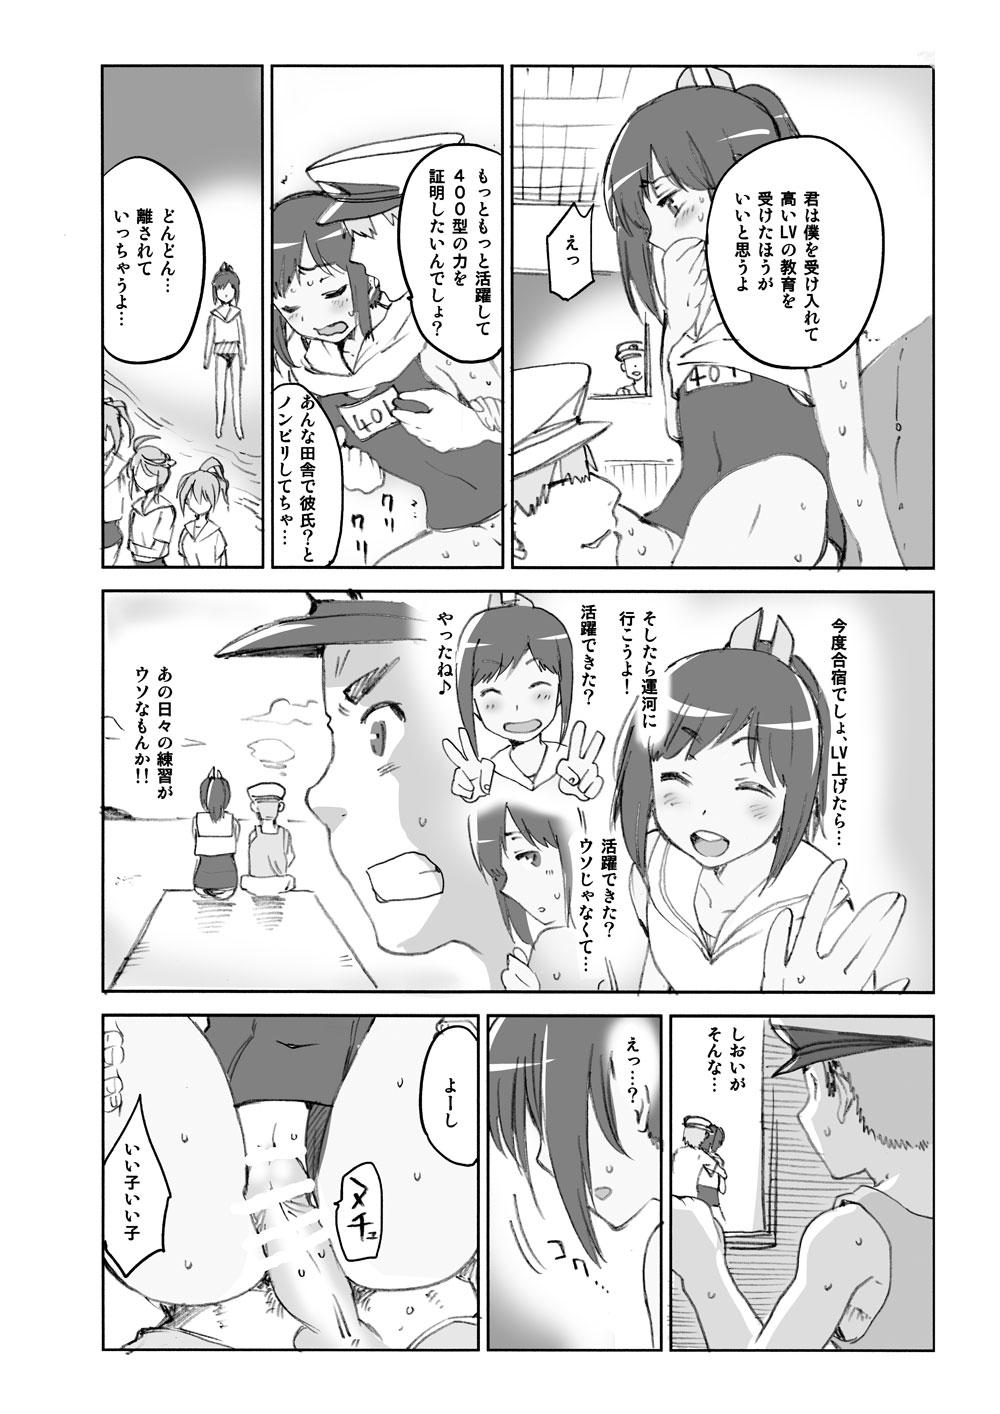 COMIC1☆9 Omake - Curry to Bouhatei 4